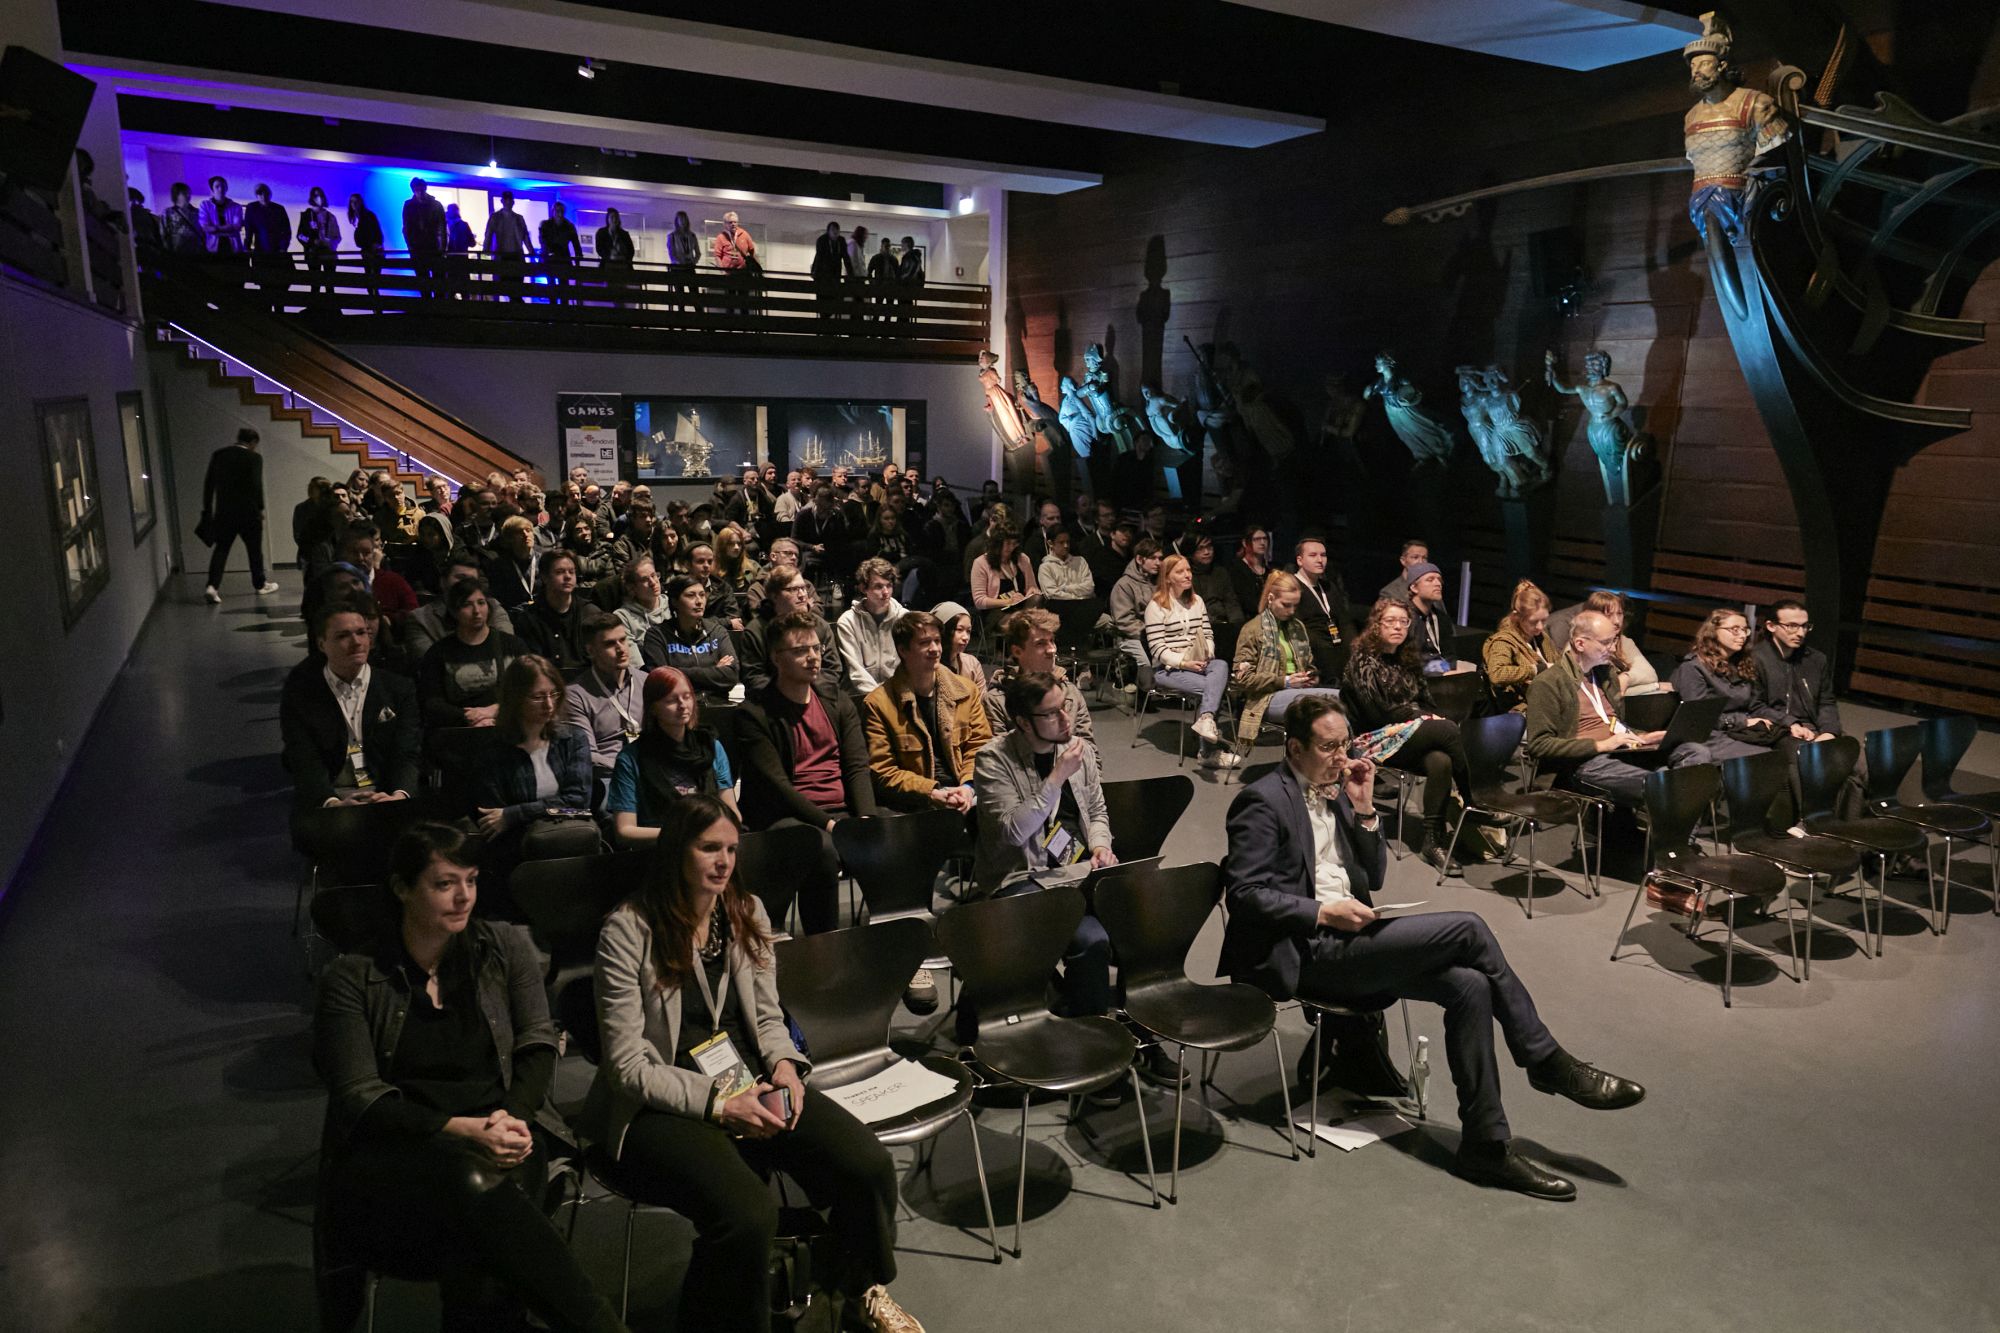 Full house at the opening of the Hamburg Games Conference 2023 | Photo by Rolf Otzipka